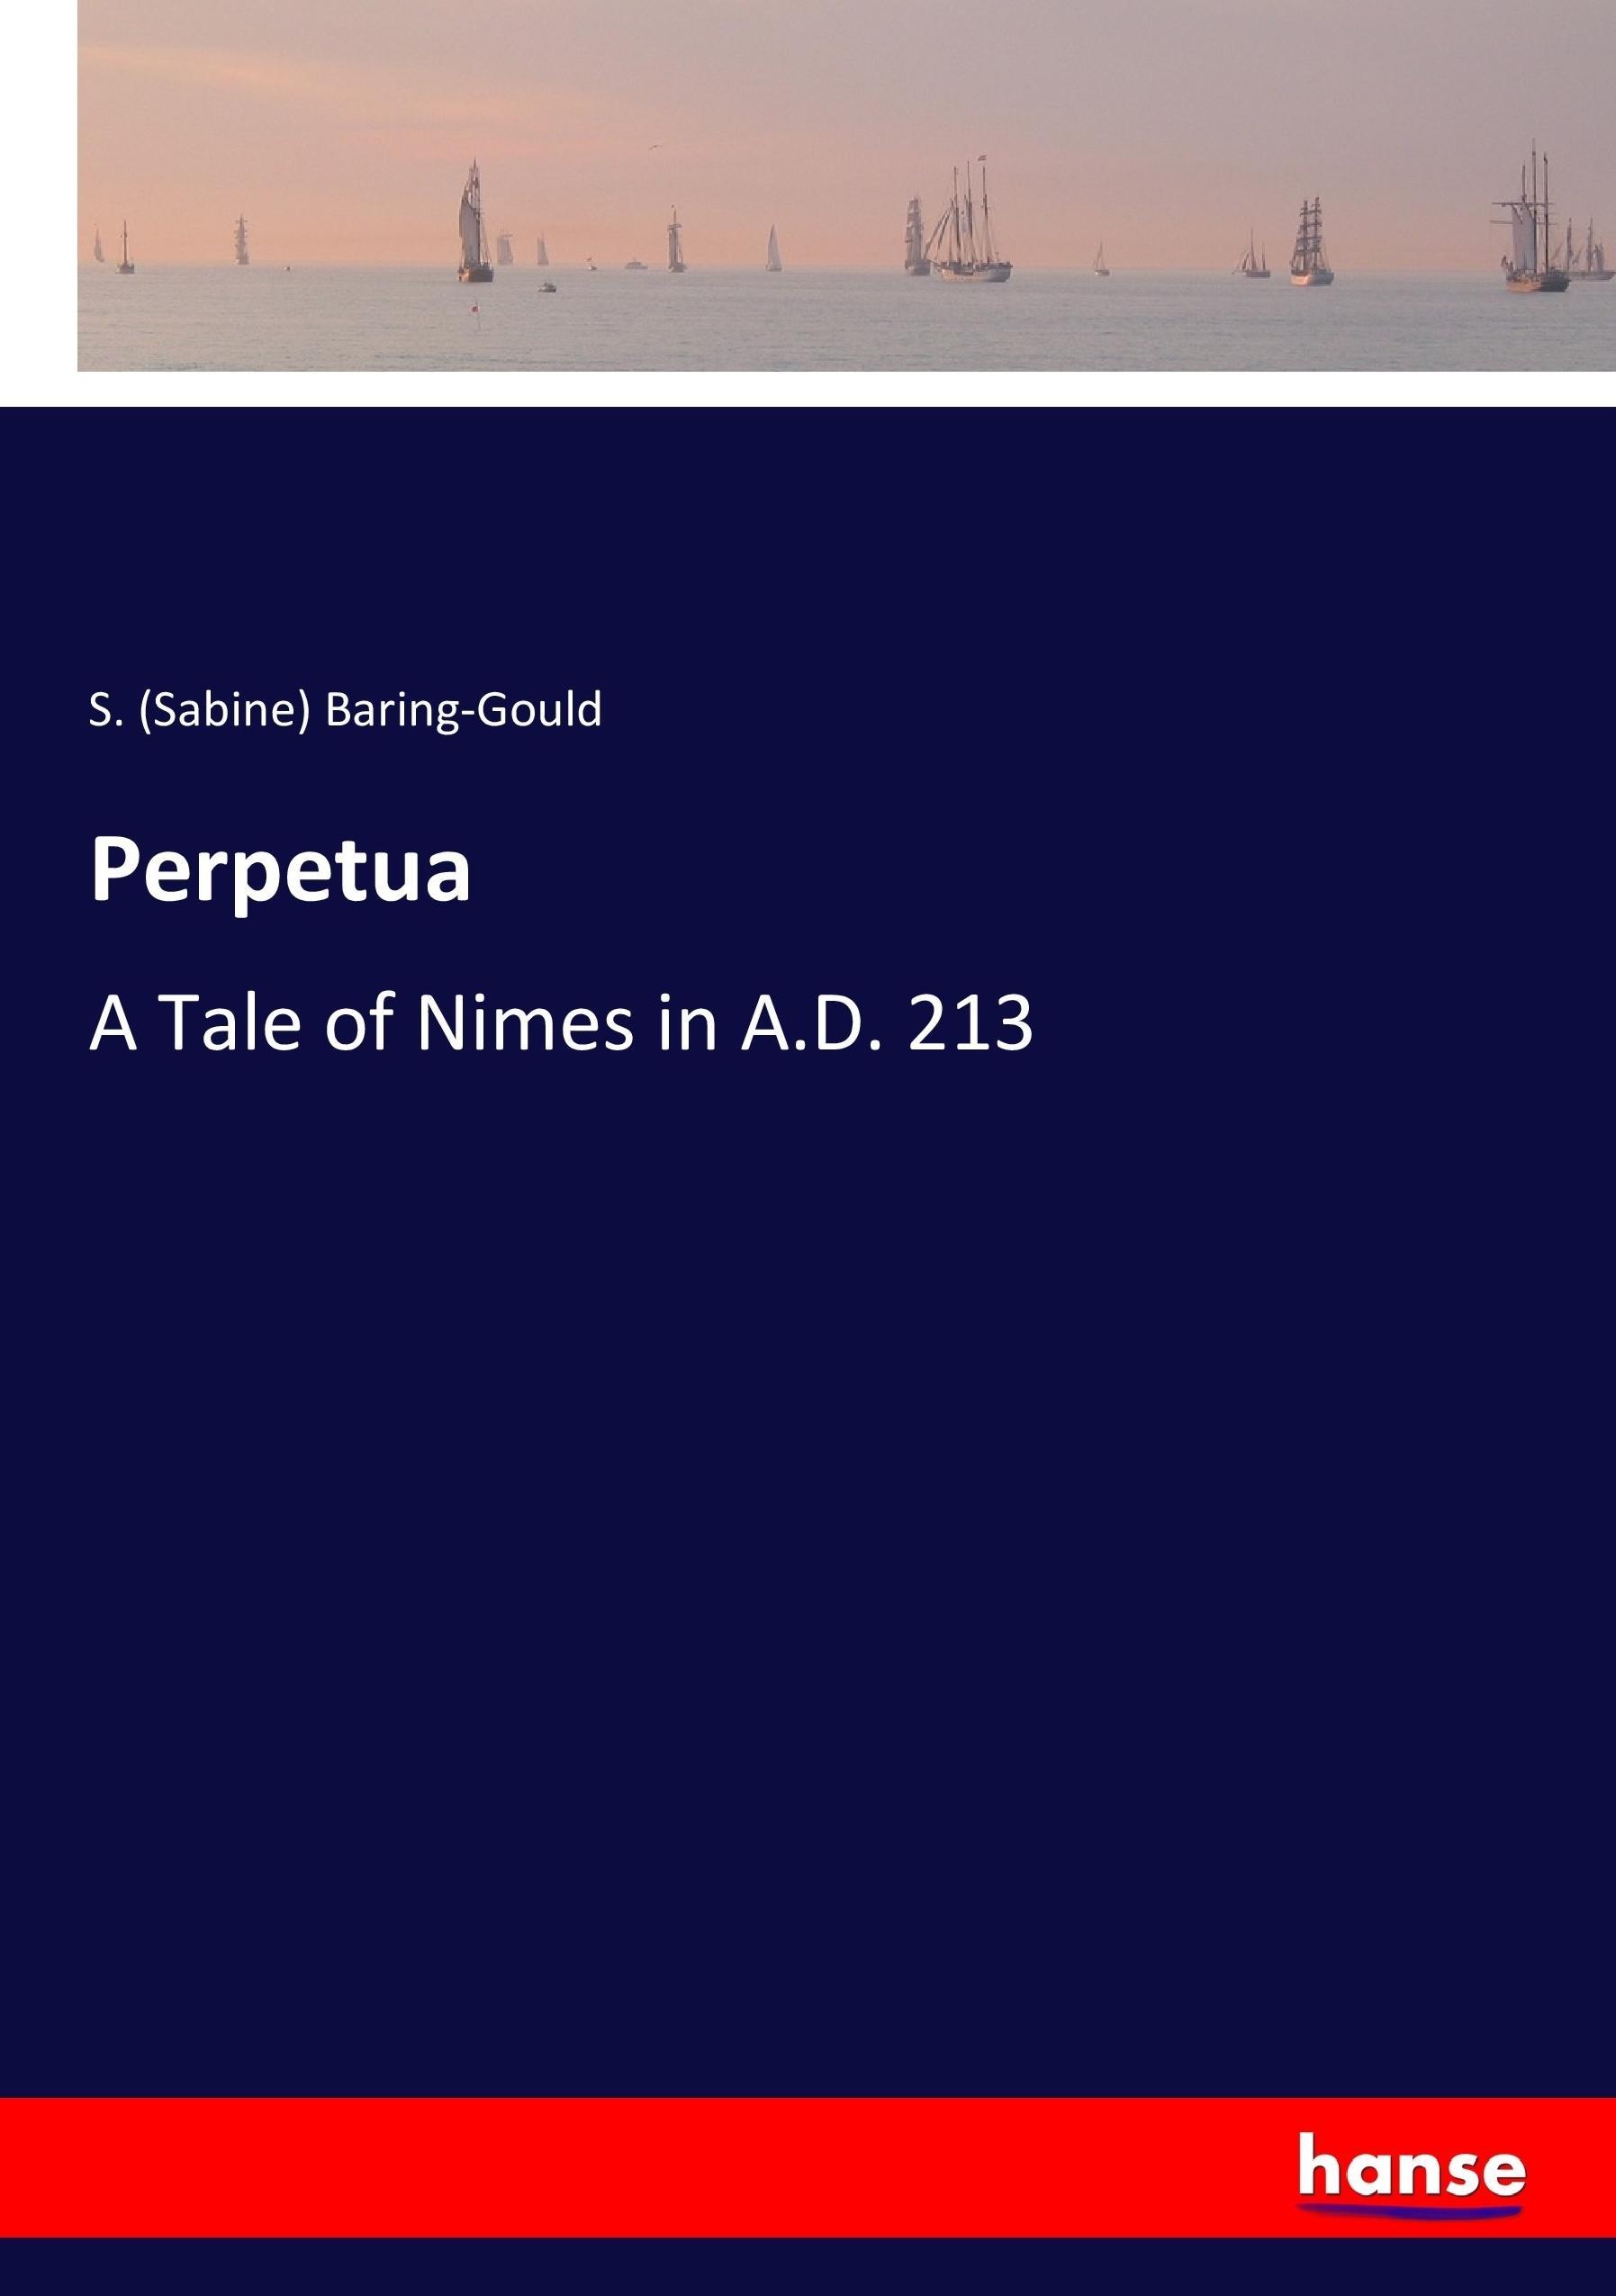 Perpetua | A Tale of Nimes in A.D. 213 | S. Baring-Gould | Taschenbuch | Paperback | 300 S. | Englisch | 2017 | hansebooks | EAN 9783337023133 - Baring-Gould, S. (Sabine)